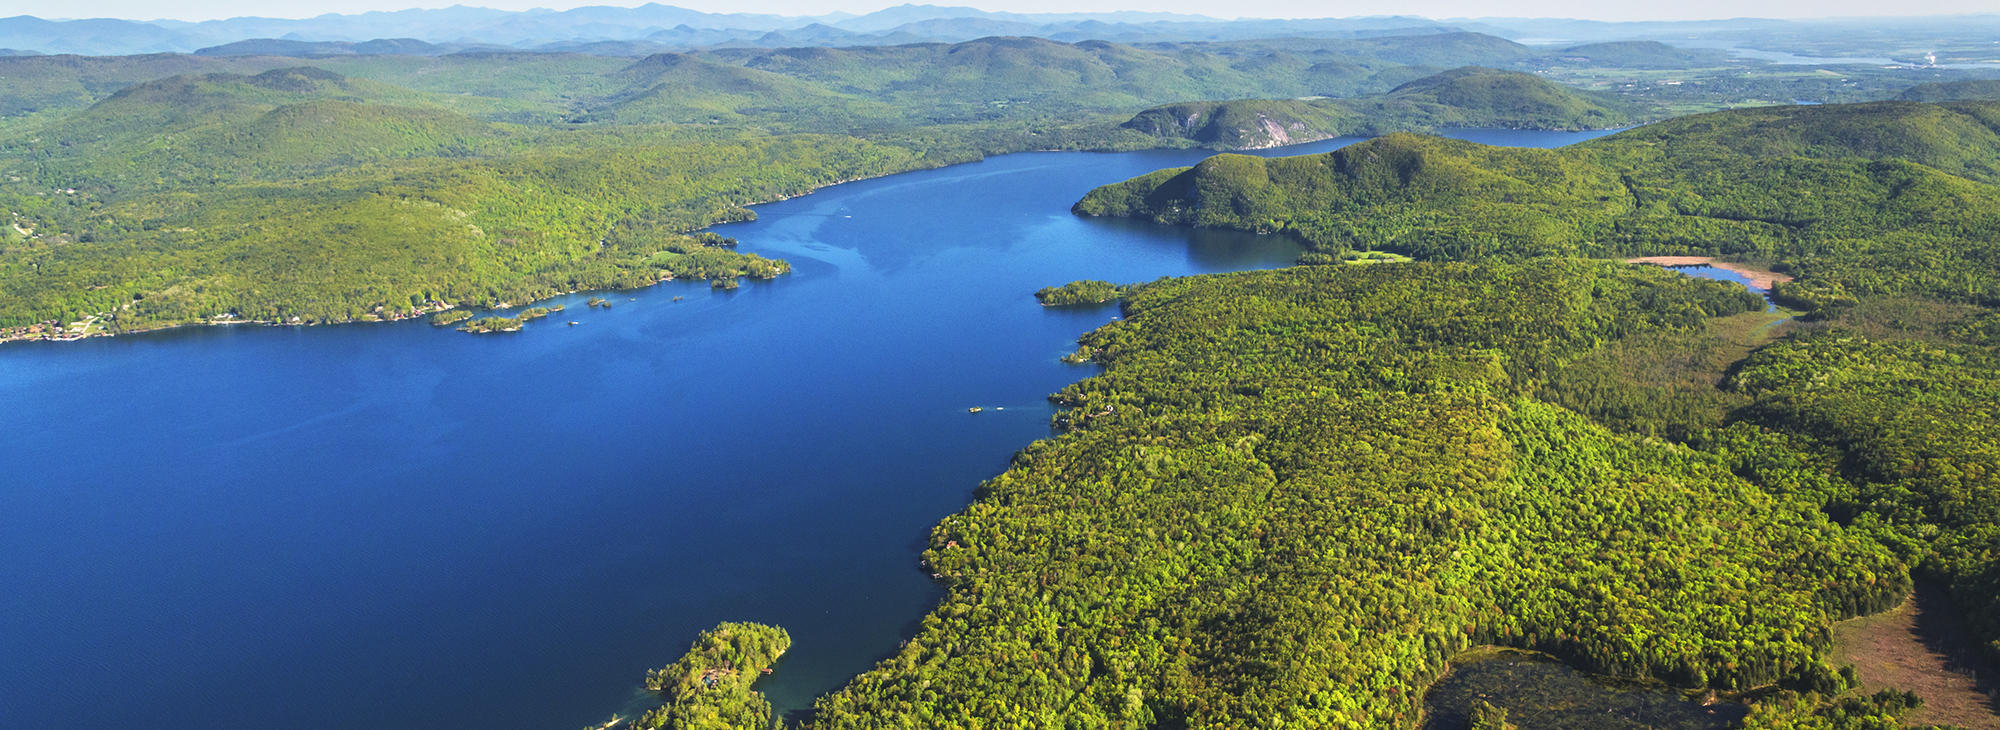 An aerial view of a lake surrounded by trees and mountains. The lake is a deep blue color, and the trees are a mix of green and yellow.